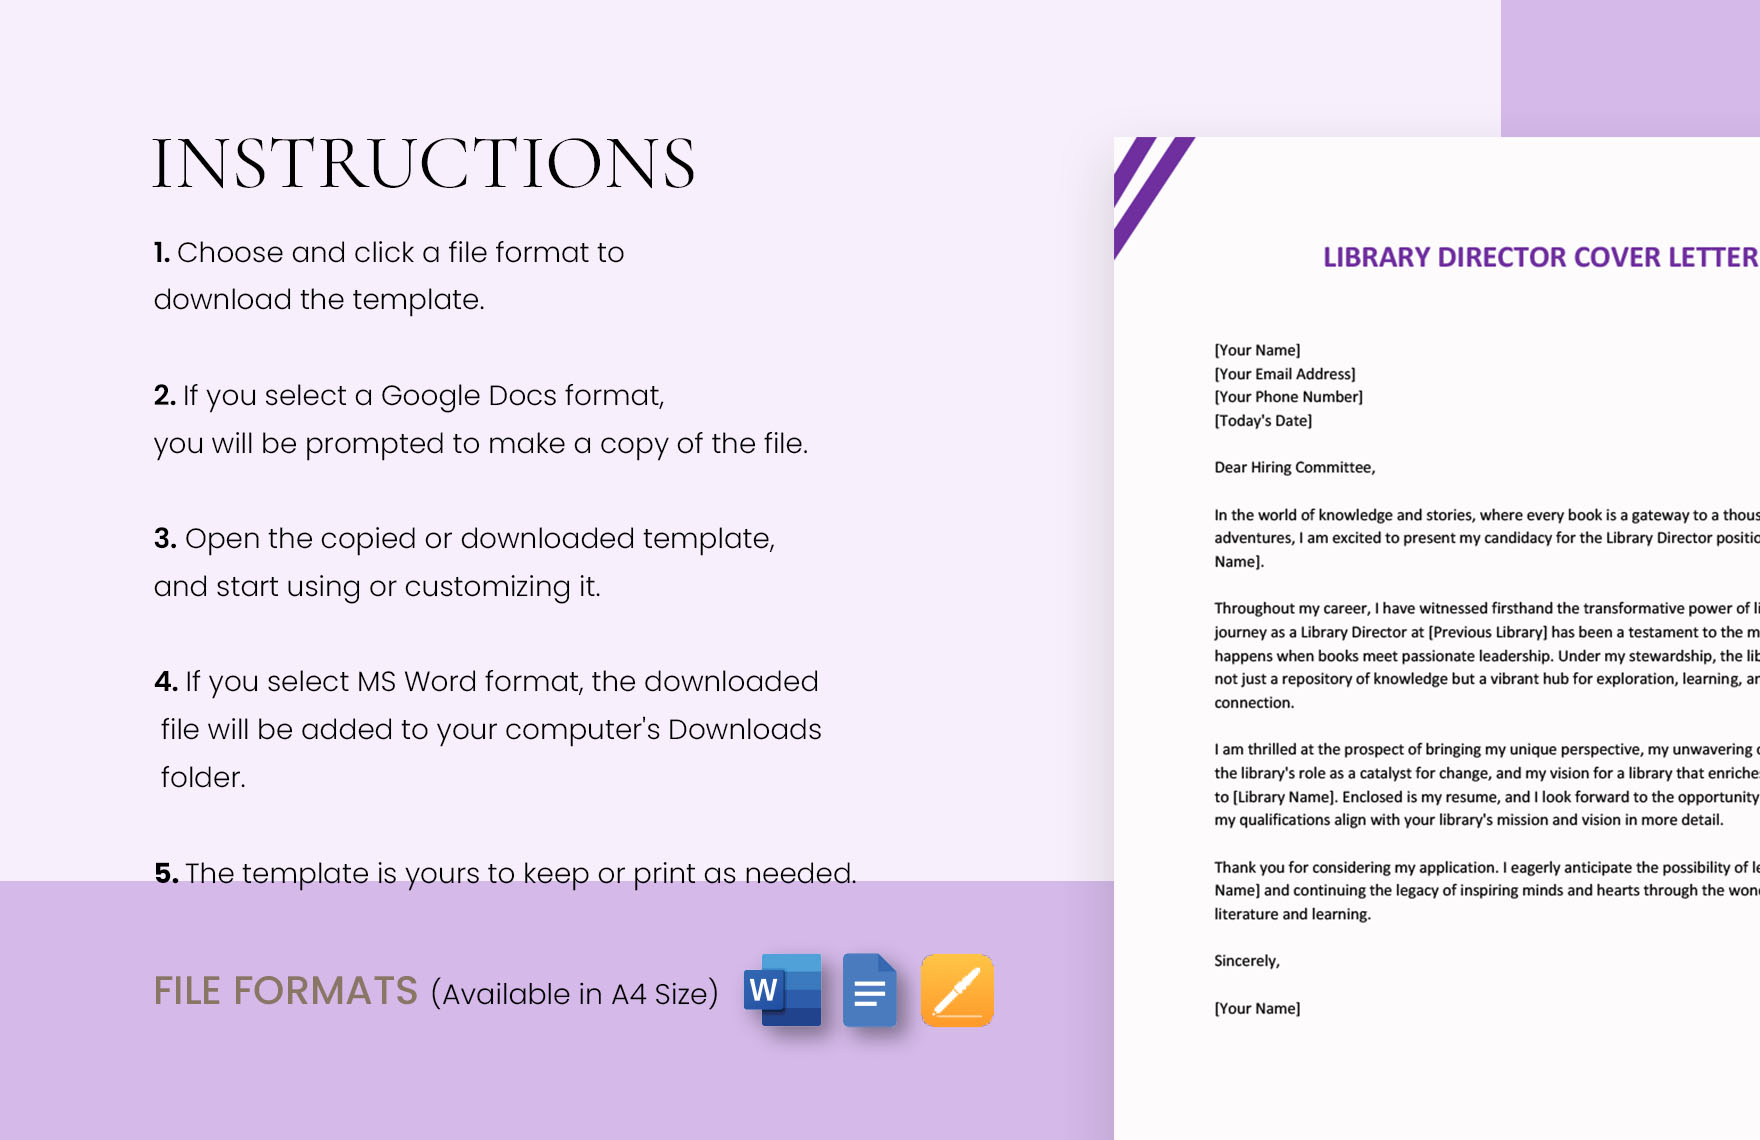 Library Director Cover Letter